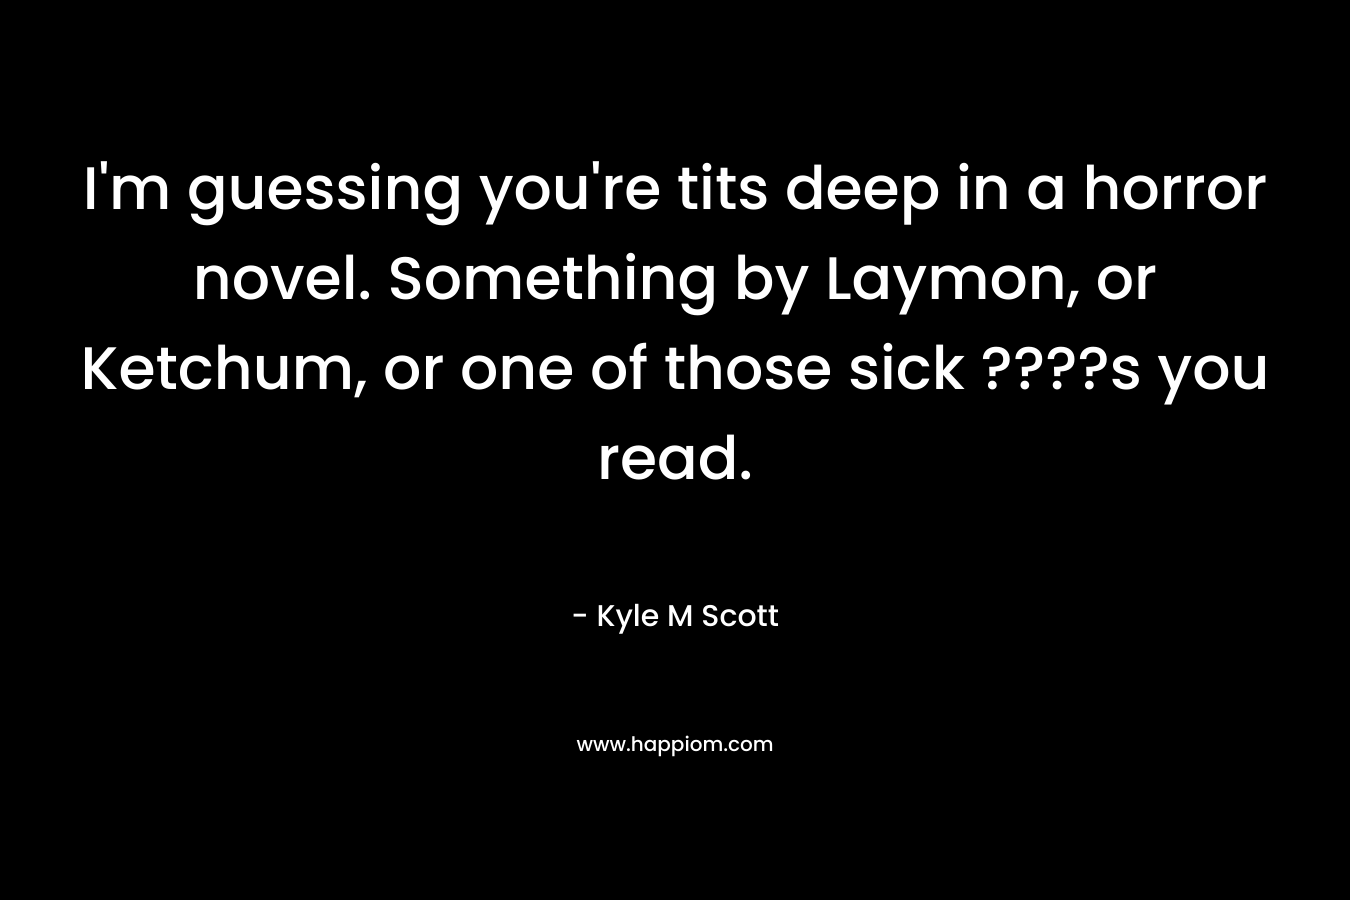 I’m guessing you’re tits deep in a horror novel. Something by Laymon, or Ketchum, or one of those sick ????s you read. – Kyle M Scott